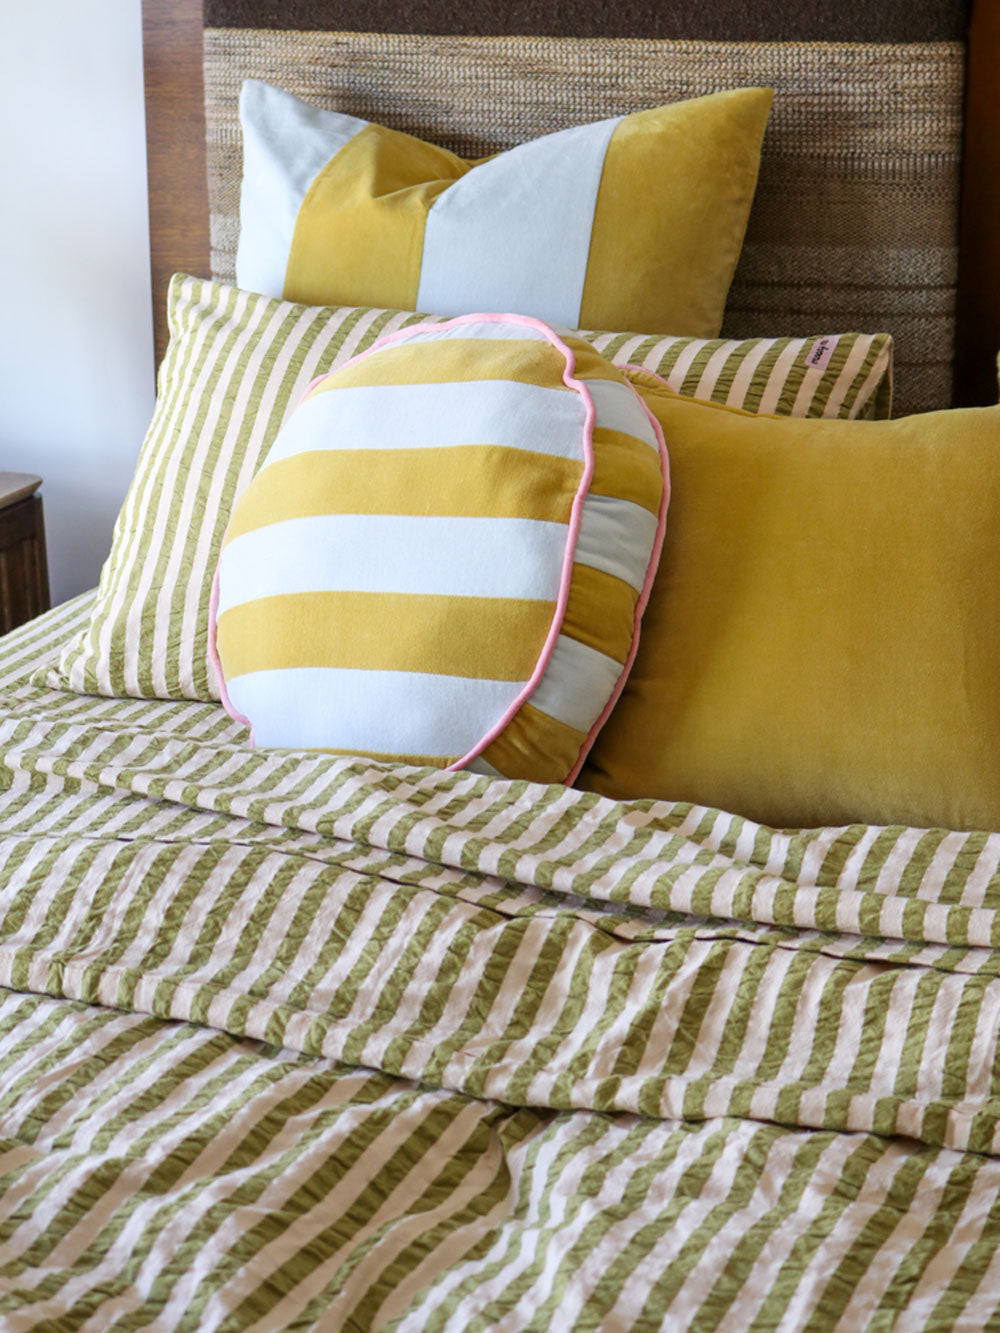 Velvet Stripe Round Cushion  by Mosey Me